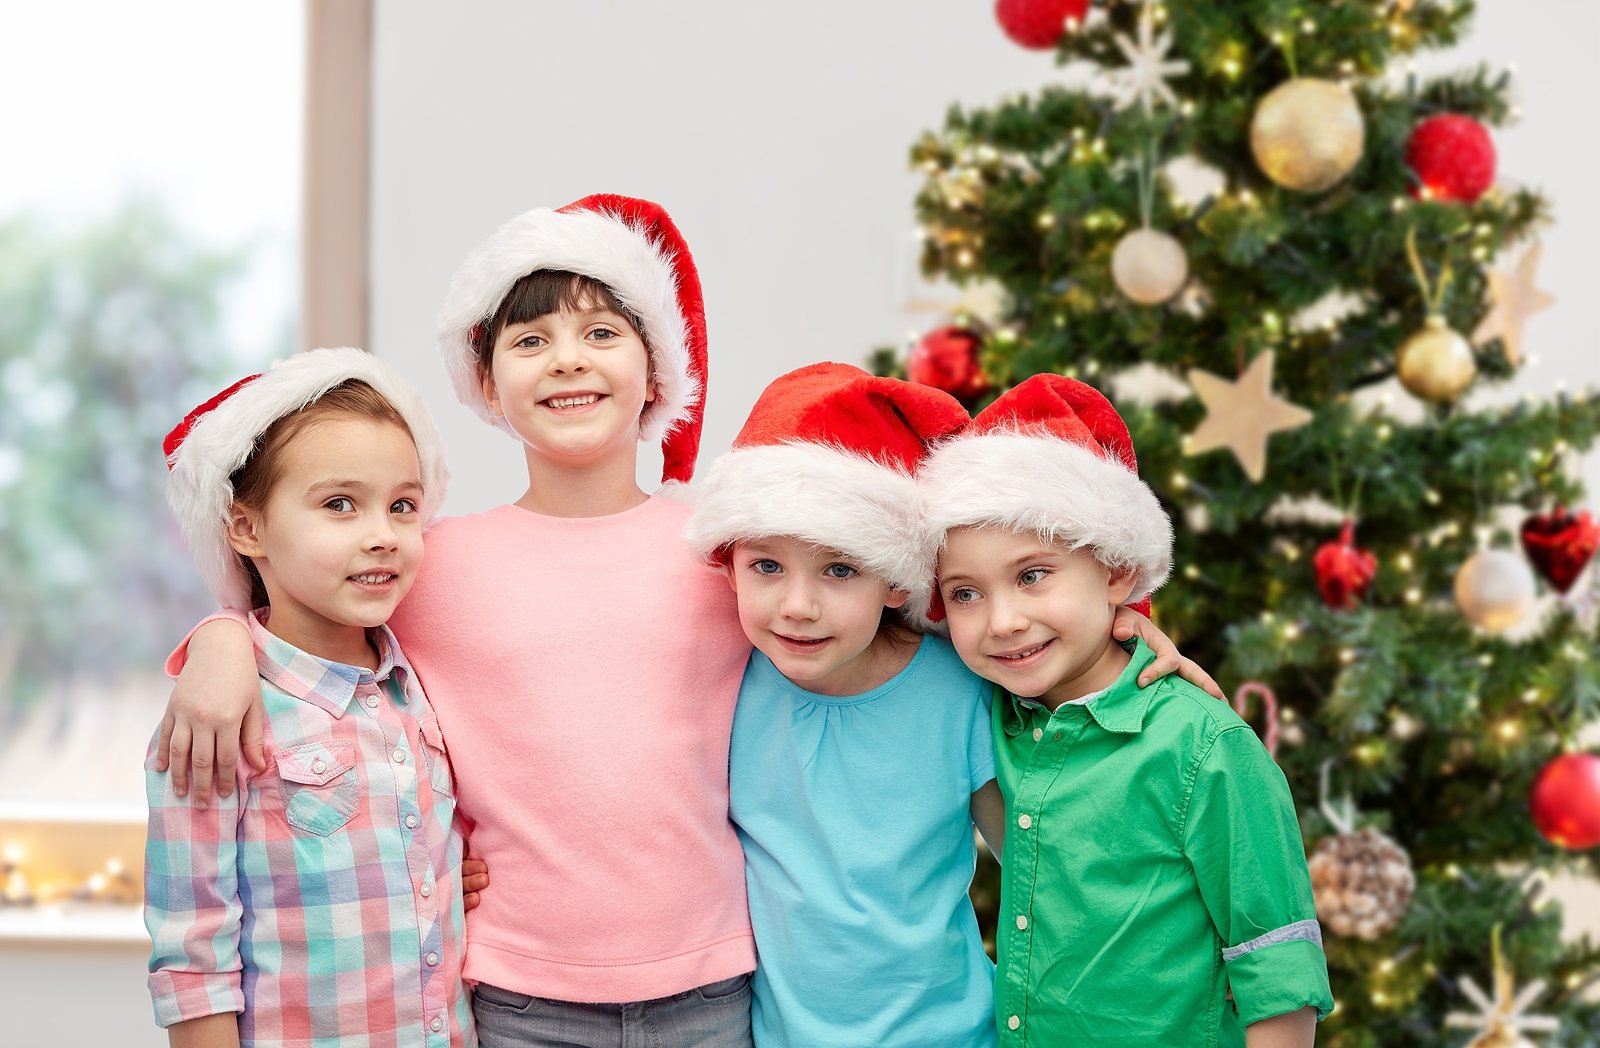 Four festive children in front of a Christmas tree